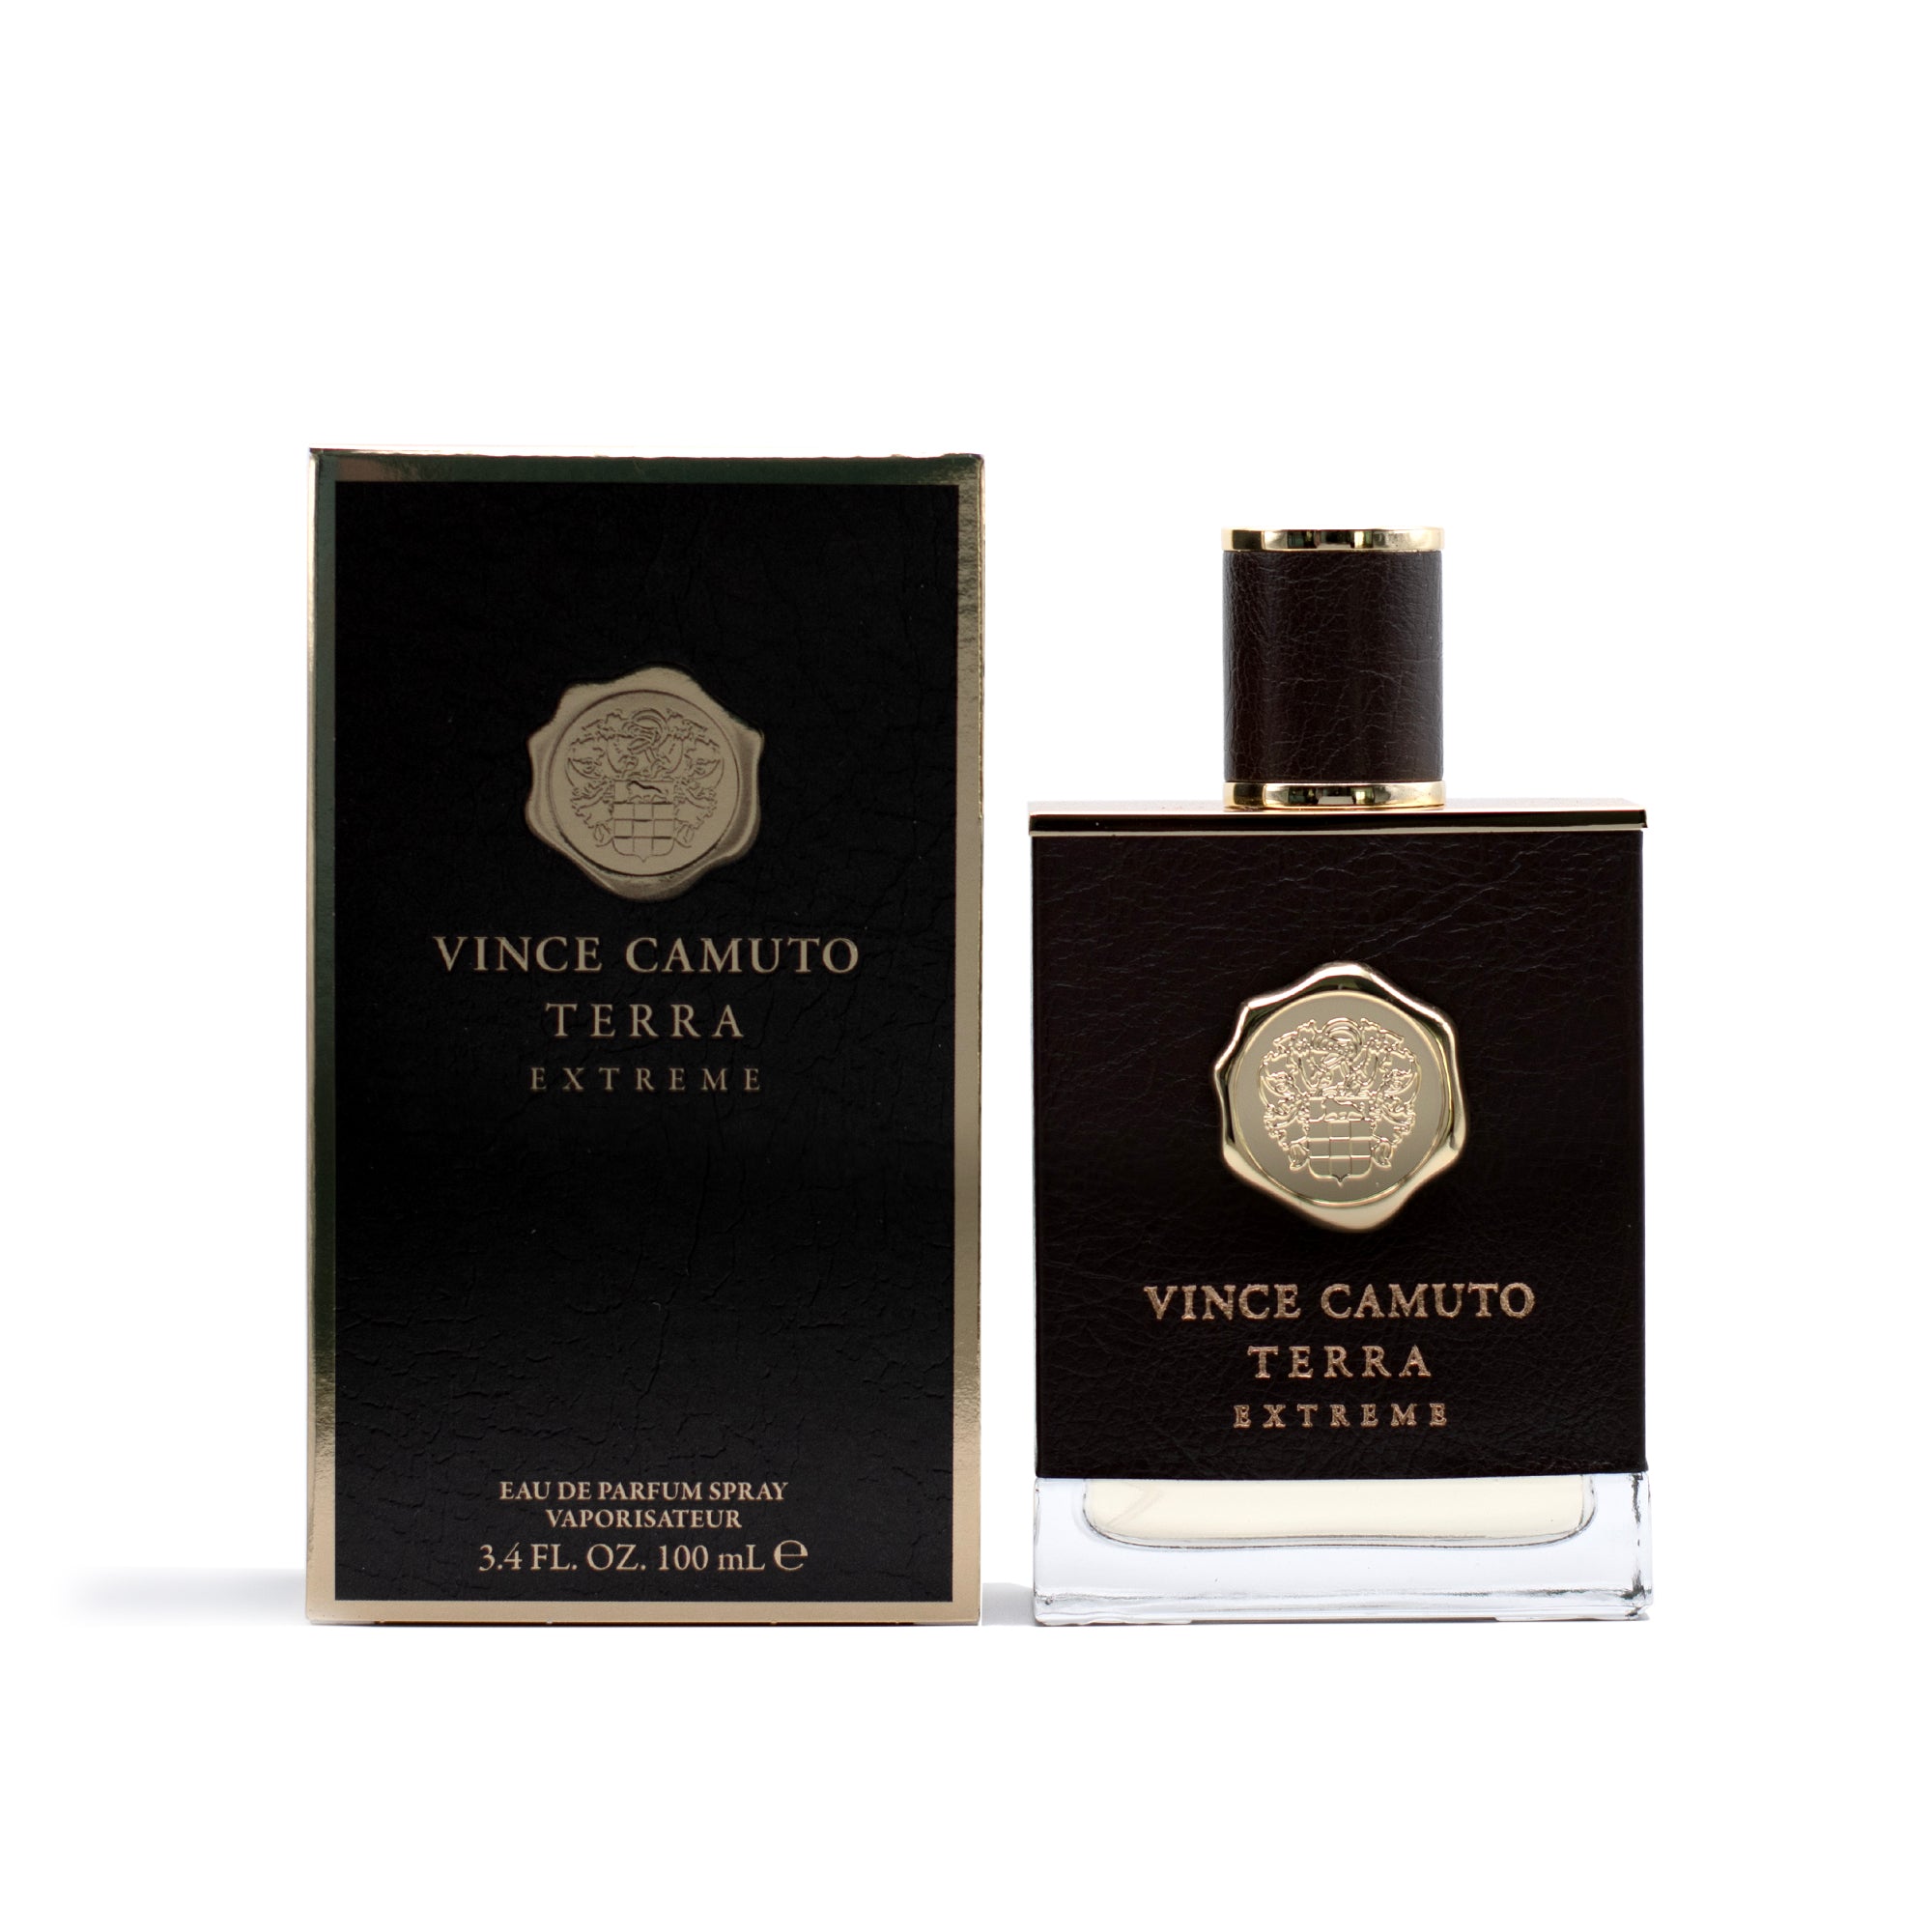 Perfume Dazzle - Terra Extreme by Vince Camuto 100ml EDT Spray $13,500 Men  VANILLA, AMBER AND CITRUS A Magnetic scent for the man with Fearless Charm,  an Intense addition to the Vince